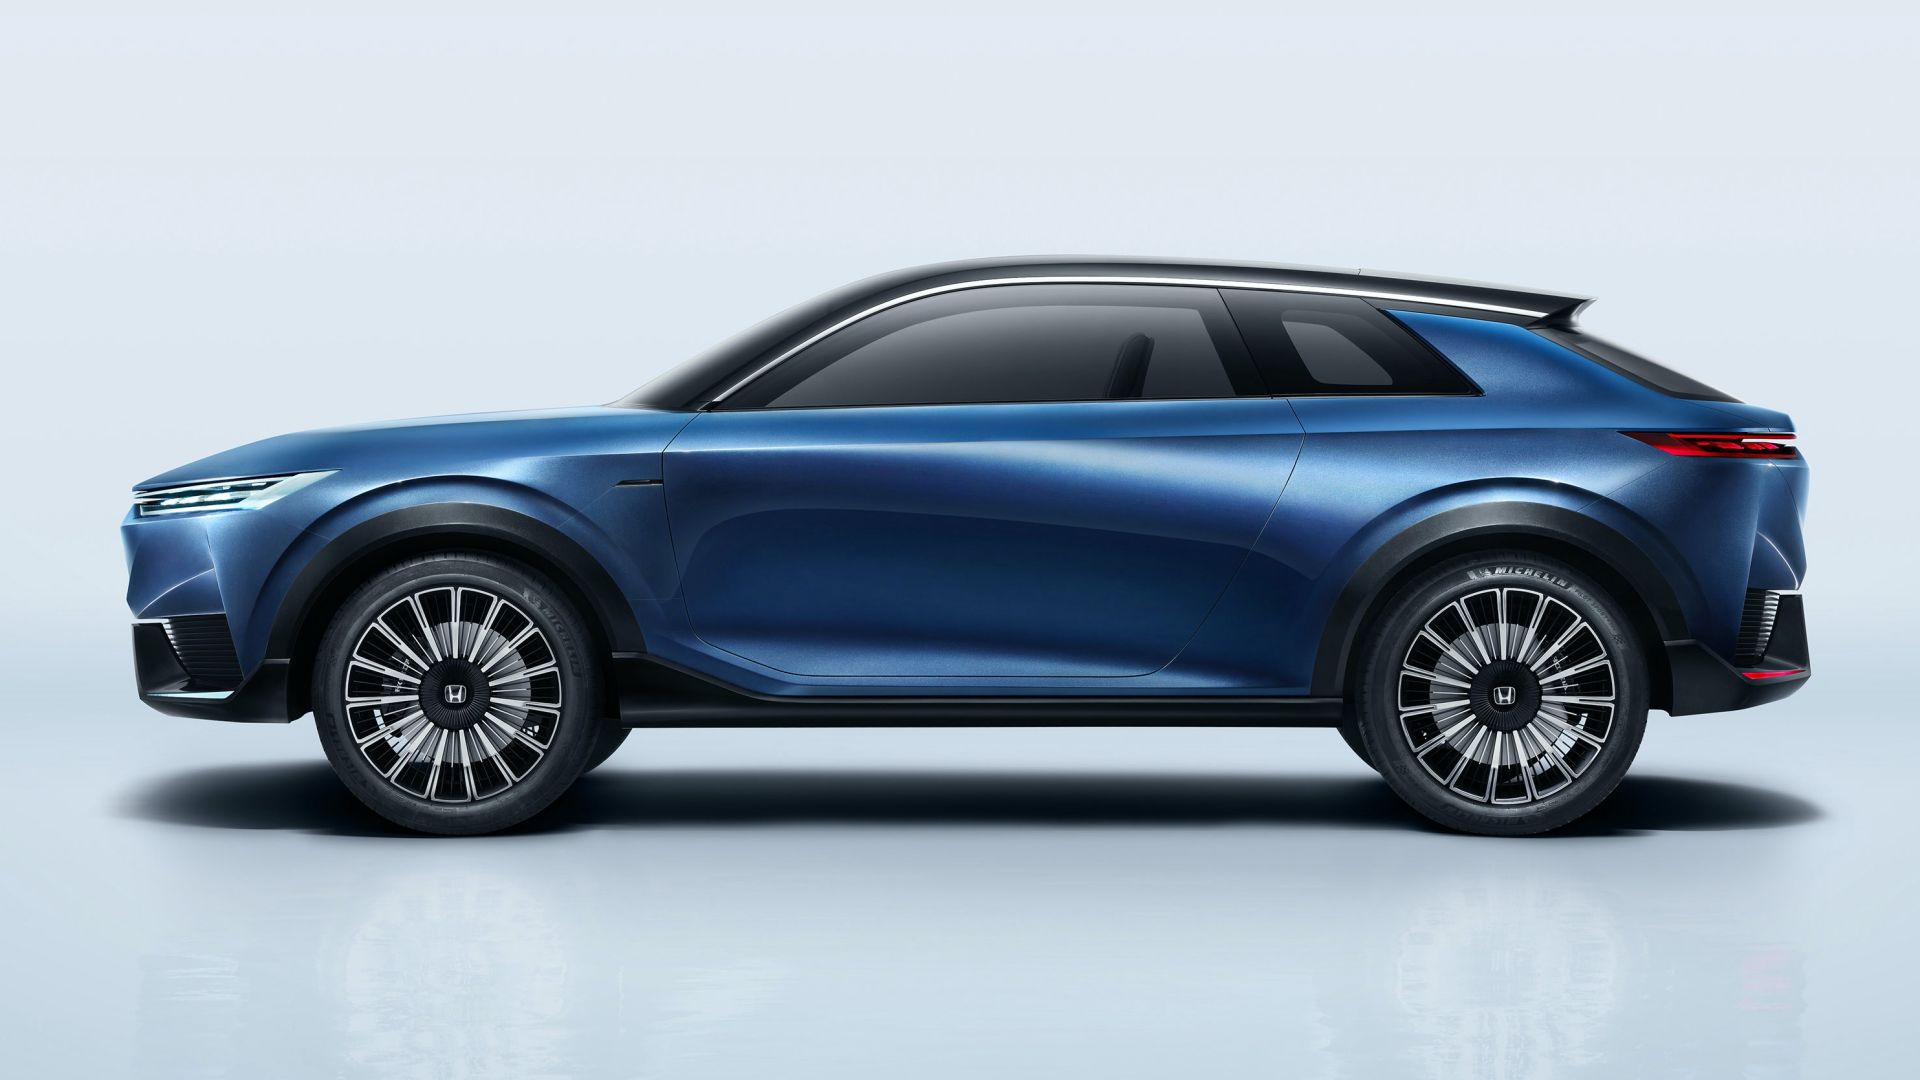 Honda SUV econcept Is An Enticing Preview Of The Brand's First EV For